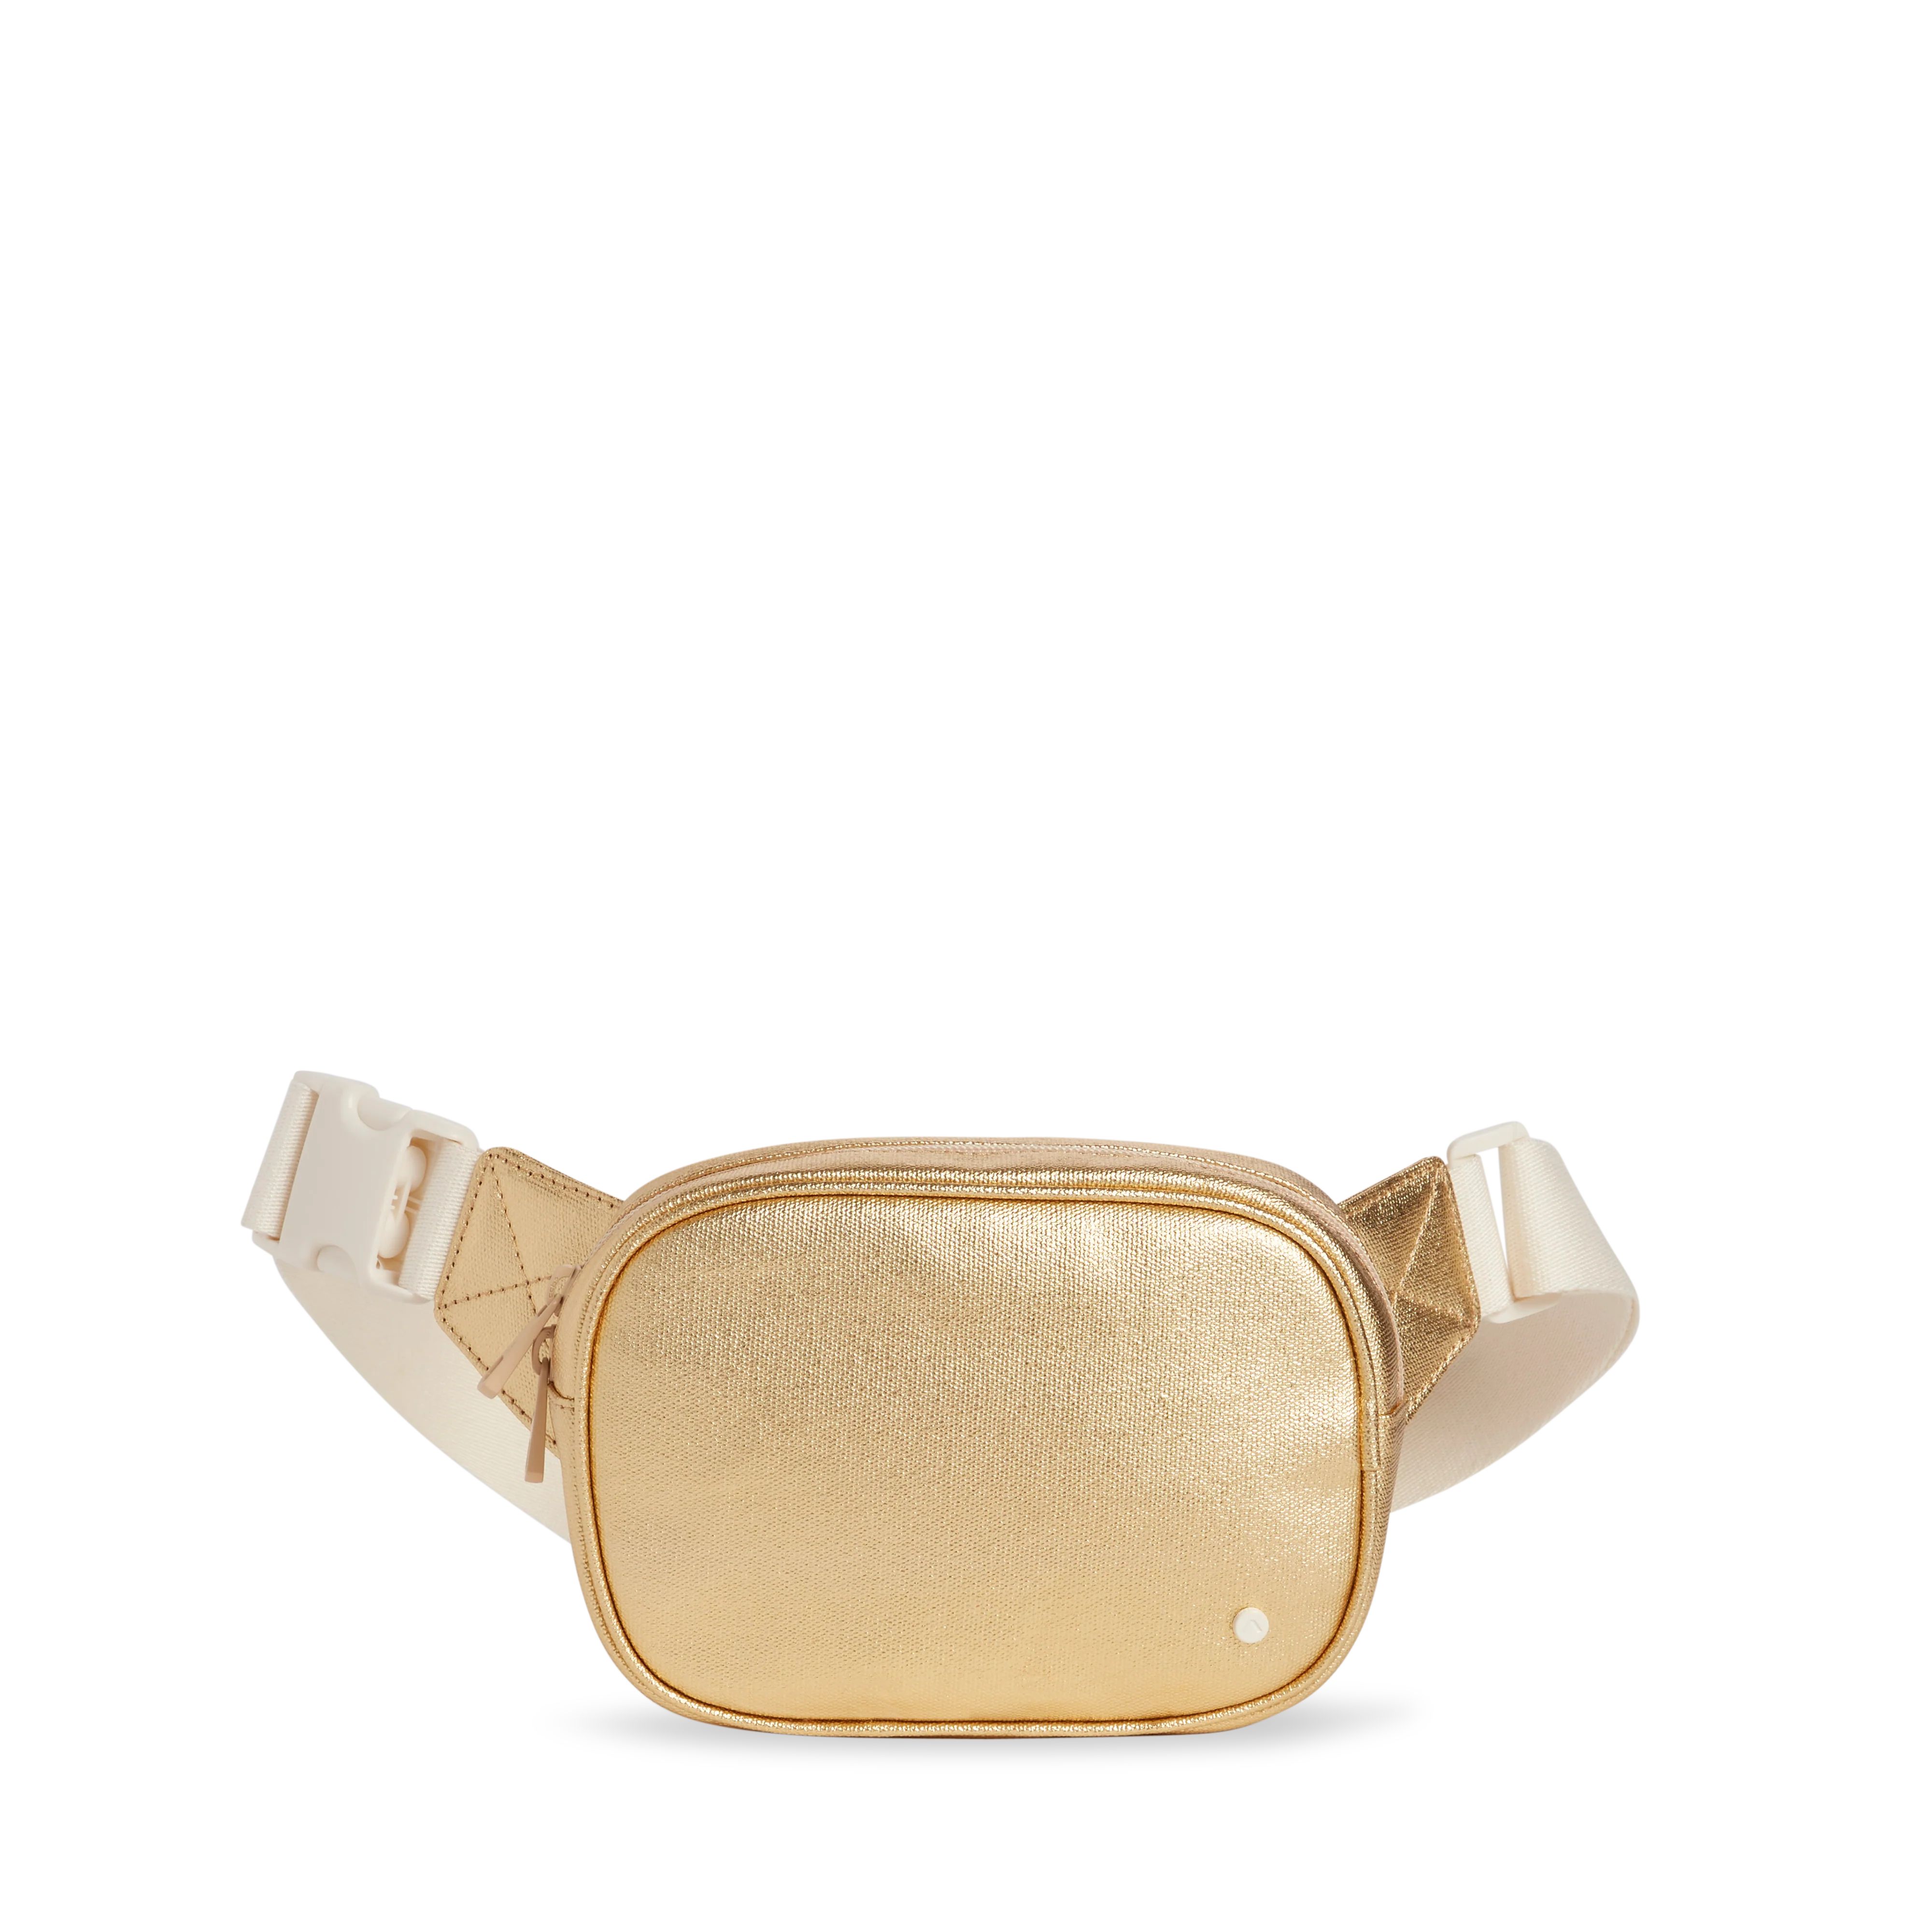 STATE Bags | Bennett Fanny Pack Metallic Gold | STATE Bags